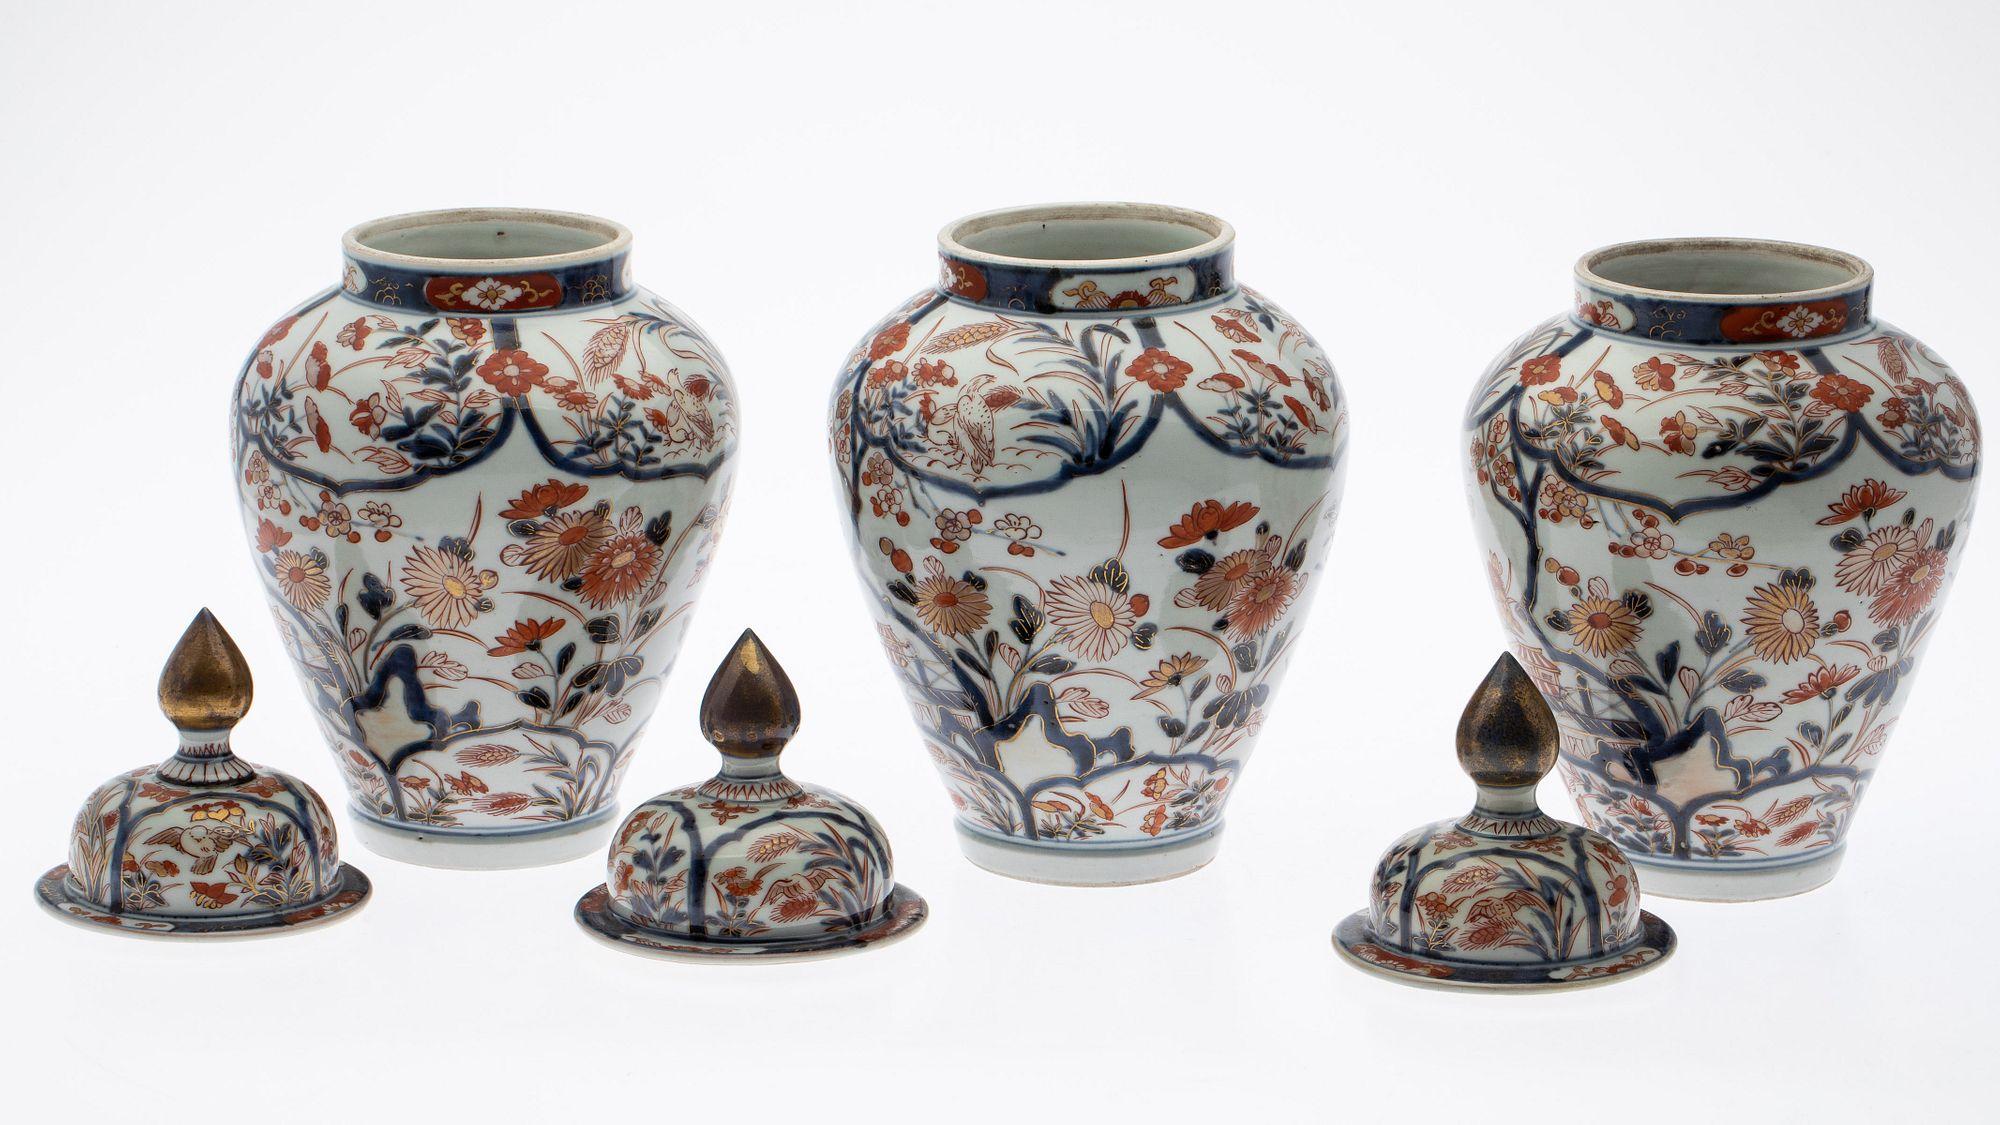 18th century Japanese Hizen ware porcelain garniture in the Imari style, including two vases and three domed jars, dating from the Edo period (1615-1868), painted in underglaze cobalt, red iron oxide and gilt with birds among grass and blossoming